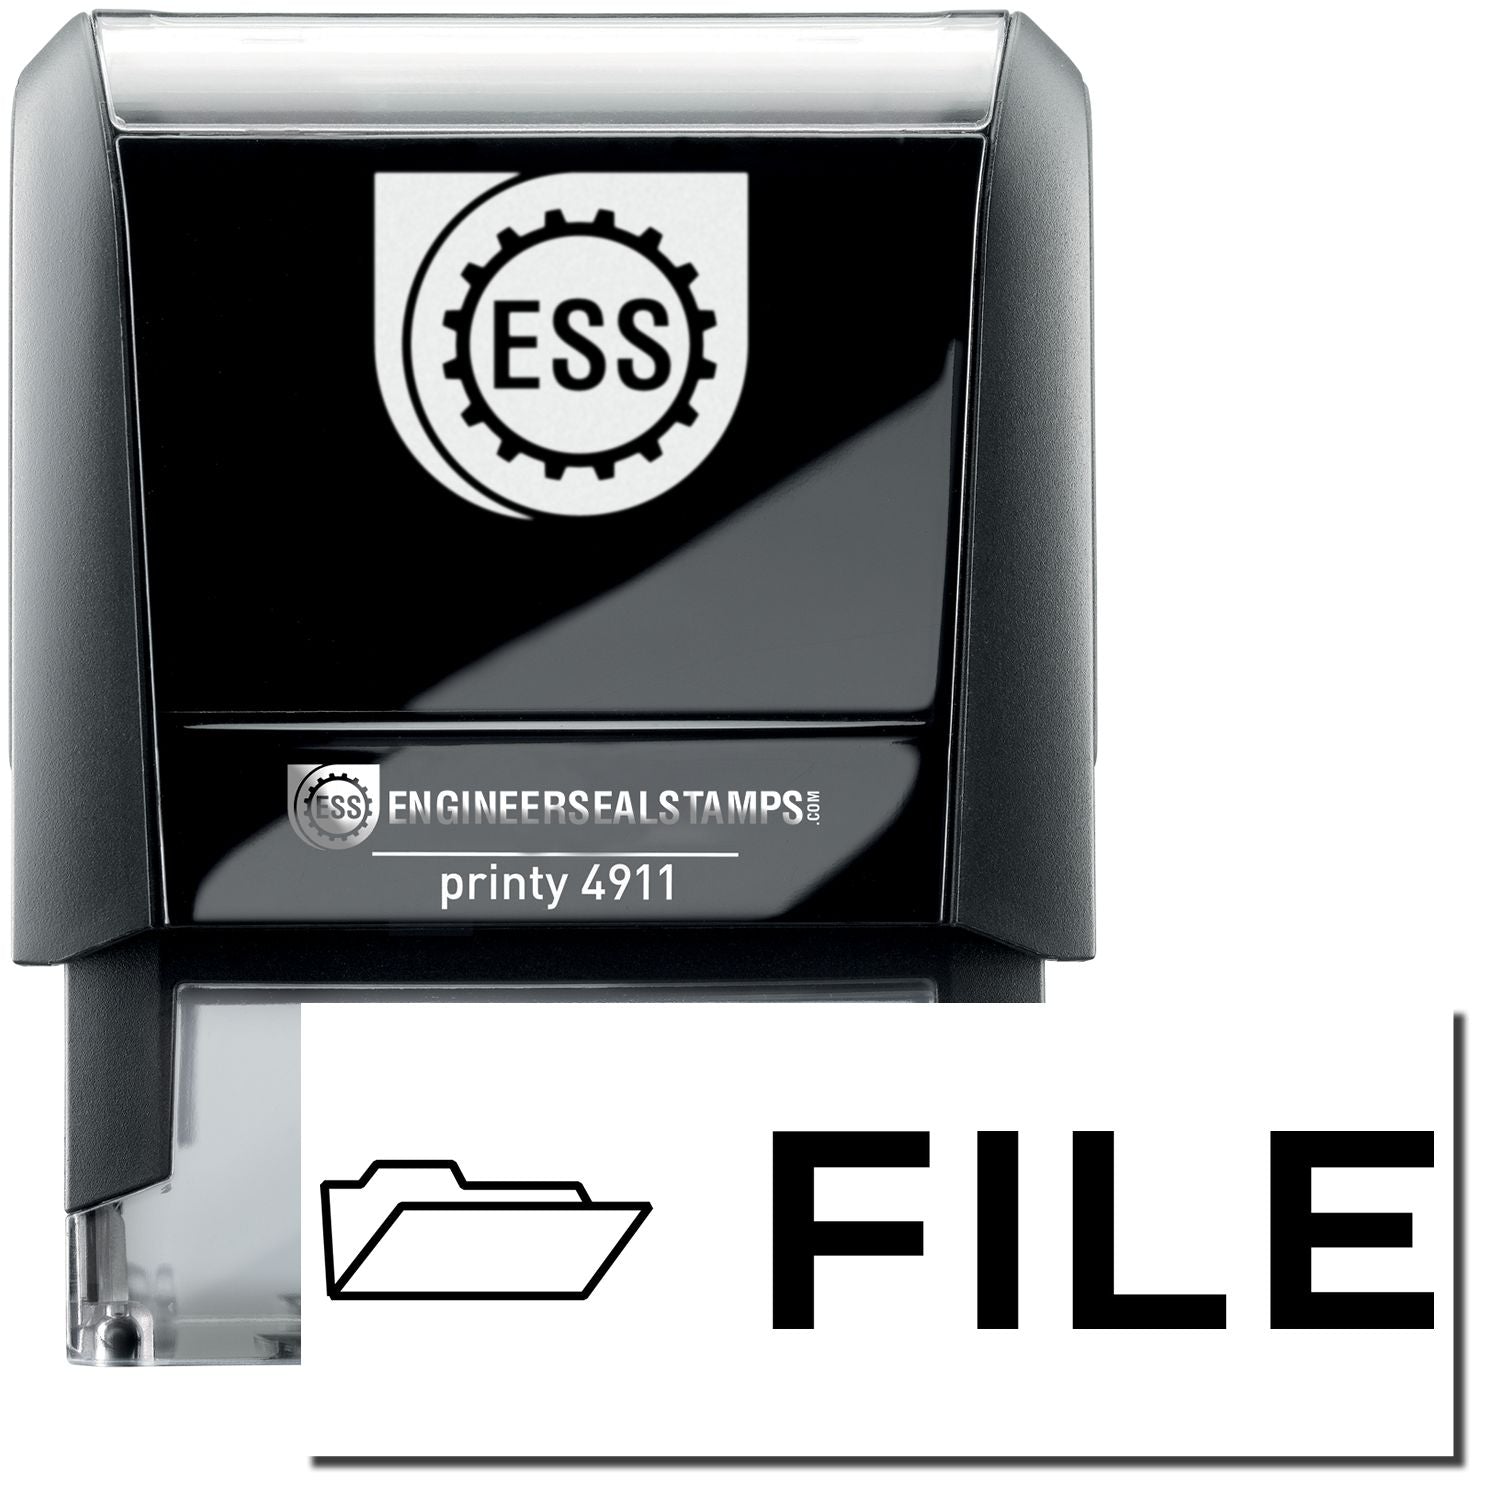 A self-inking stamp with a stamped image showing how the text "FILE" in a bold font and a small icon of a file folder on the left is displayed after stamping.